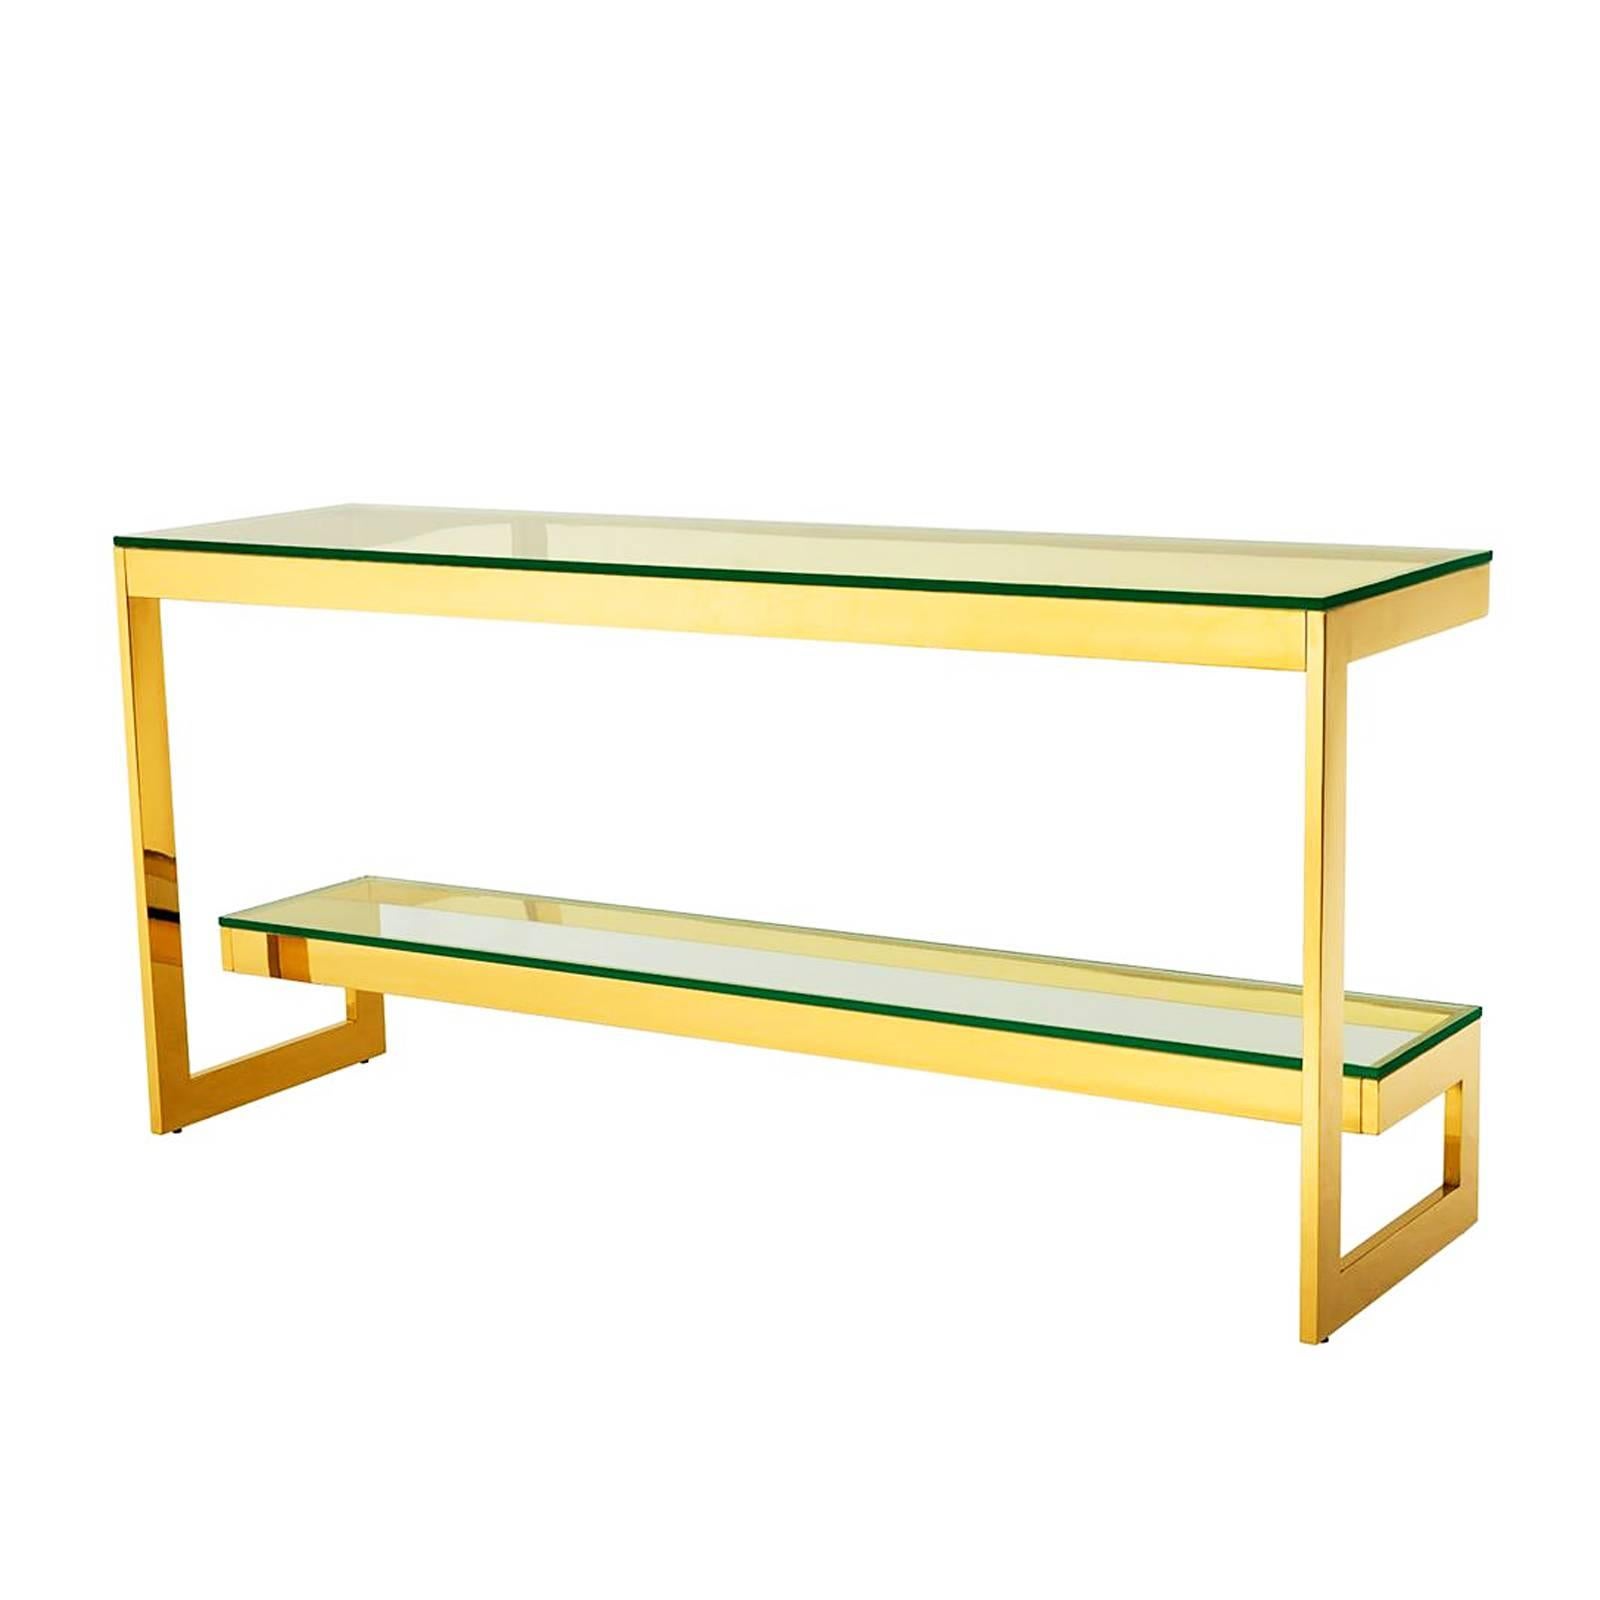 Console table double top with structure in gold
finish with two clear glass top.
Available with structure in bronze finish and two
clear glass top.
Also available in coffee table and side table double top.
